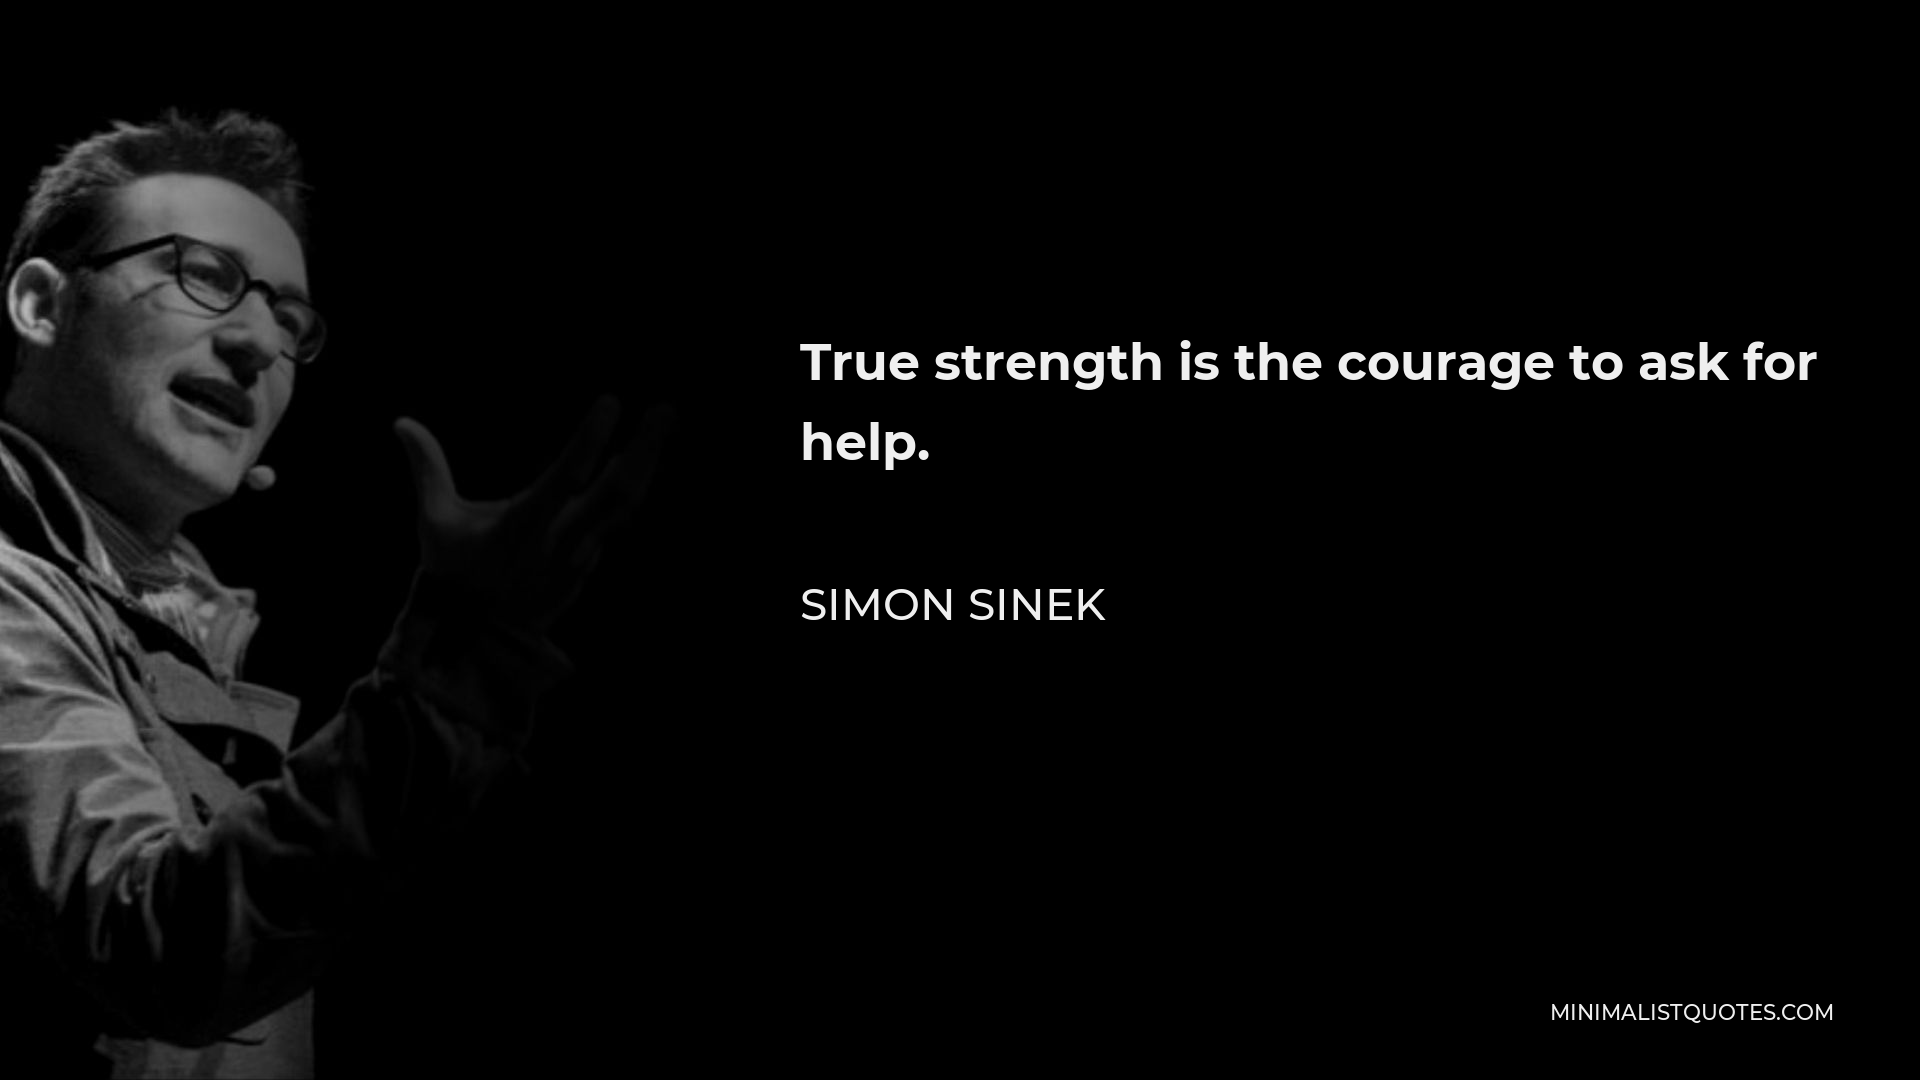 Simon Sinek Quote - True strength is the courage to ask for help.